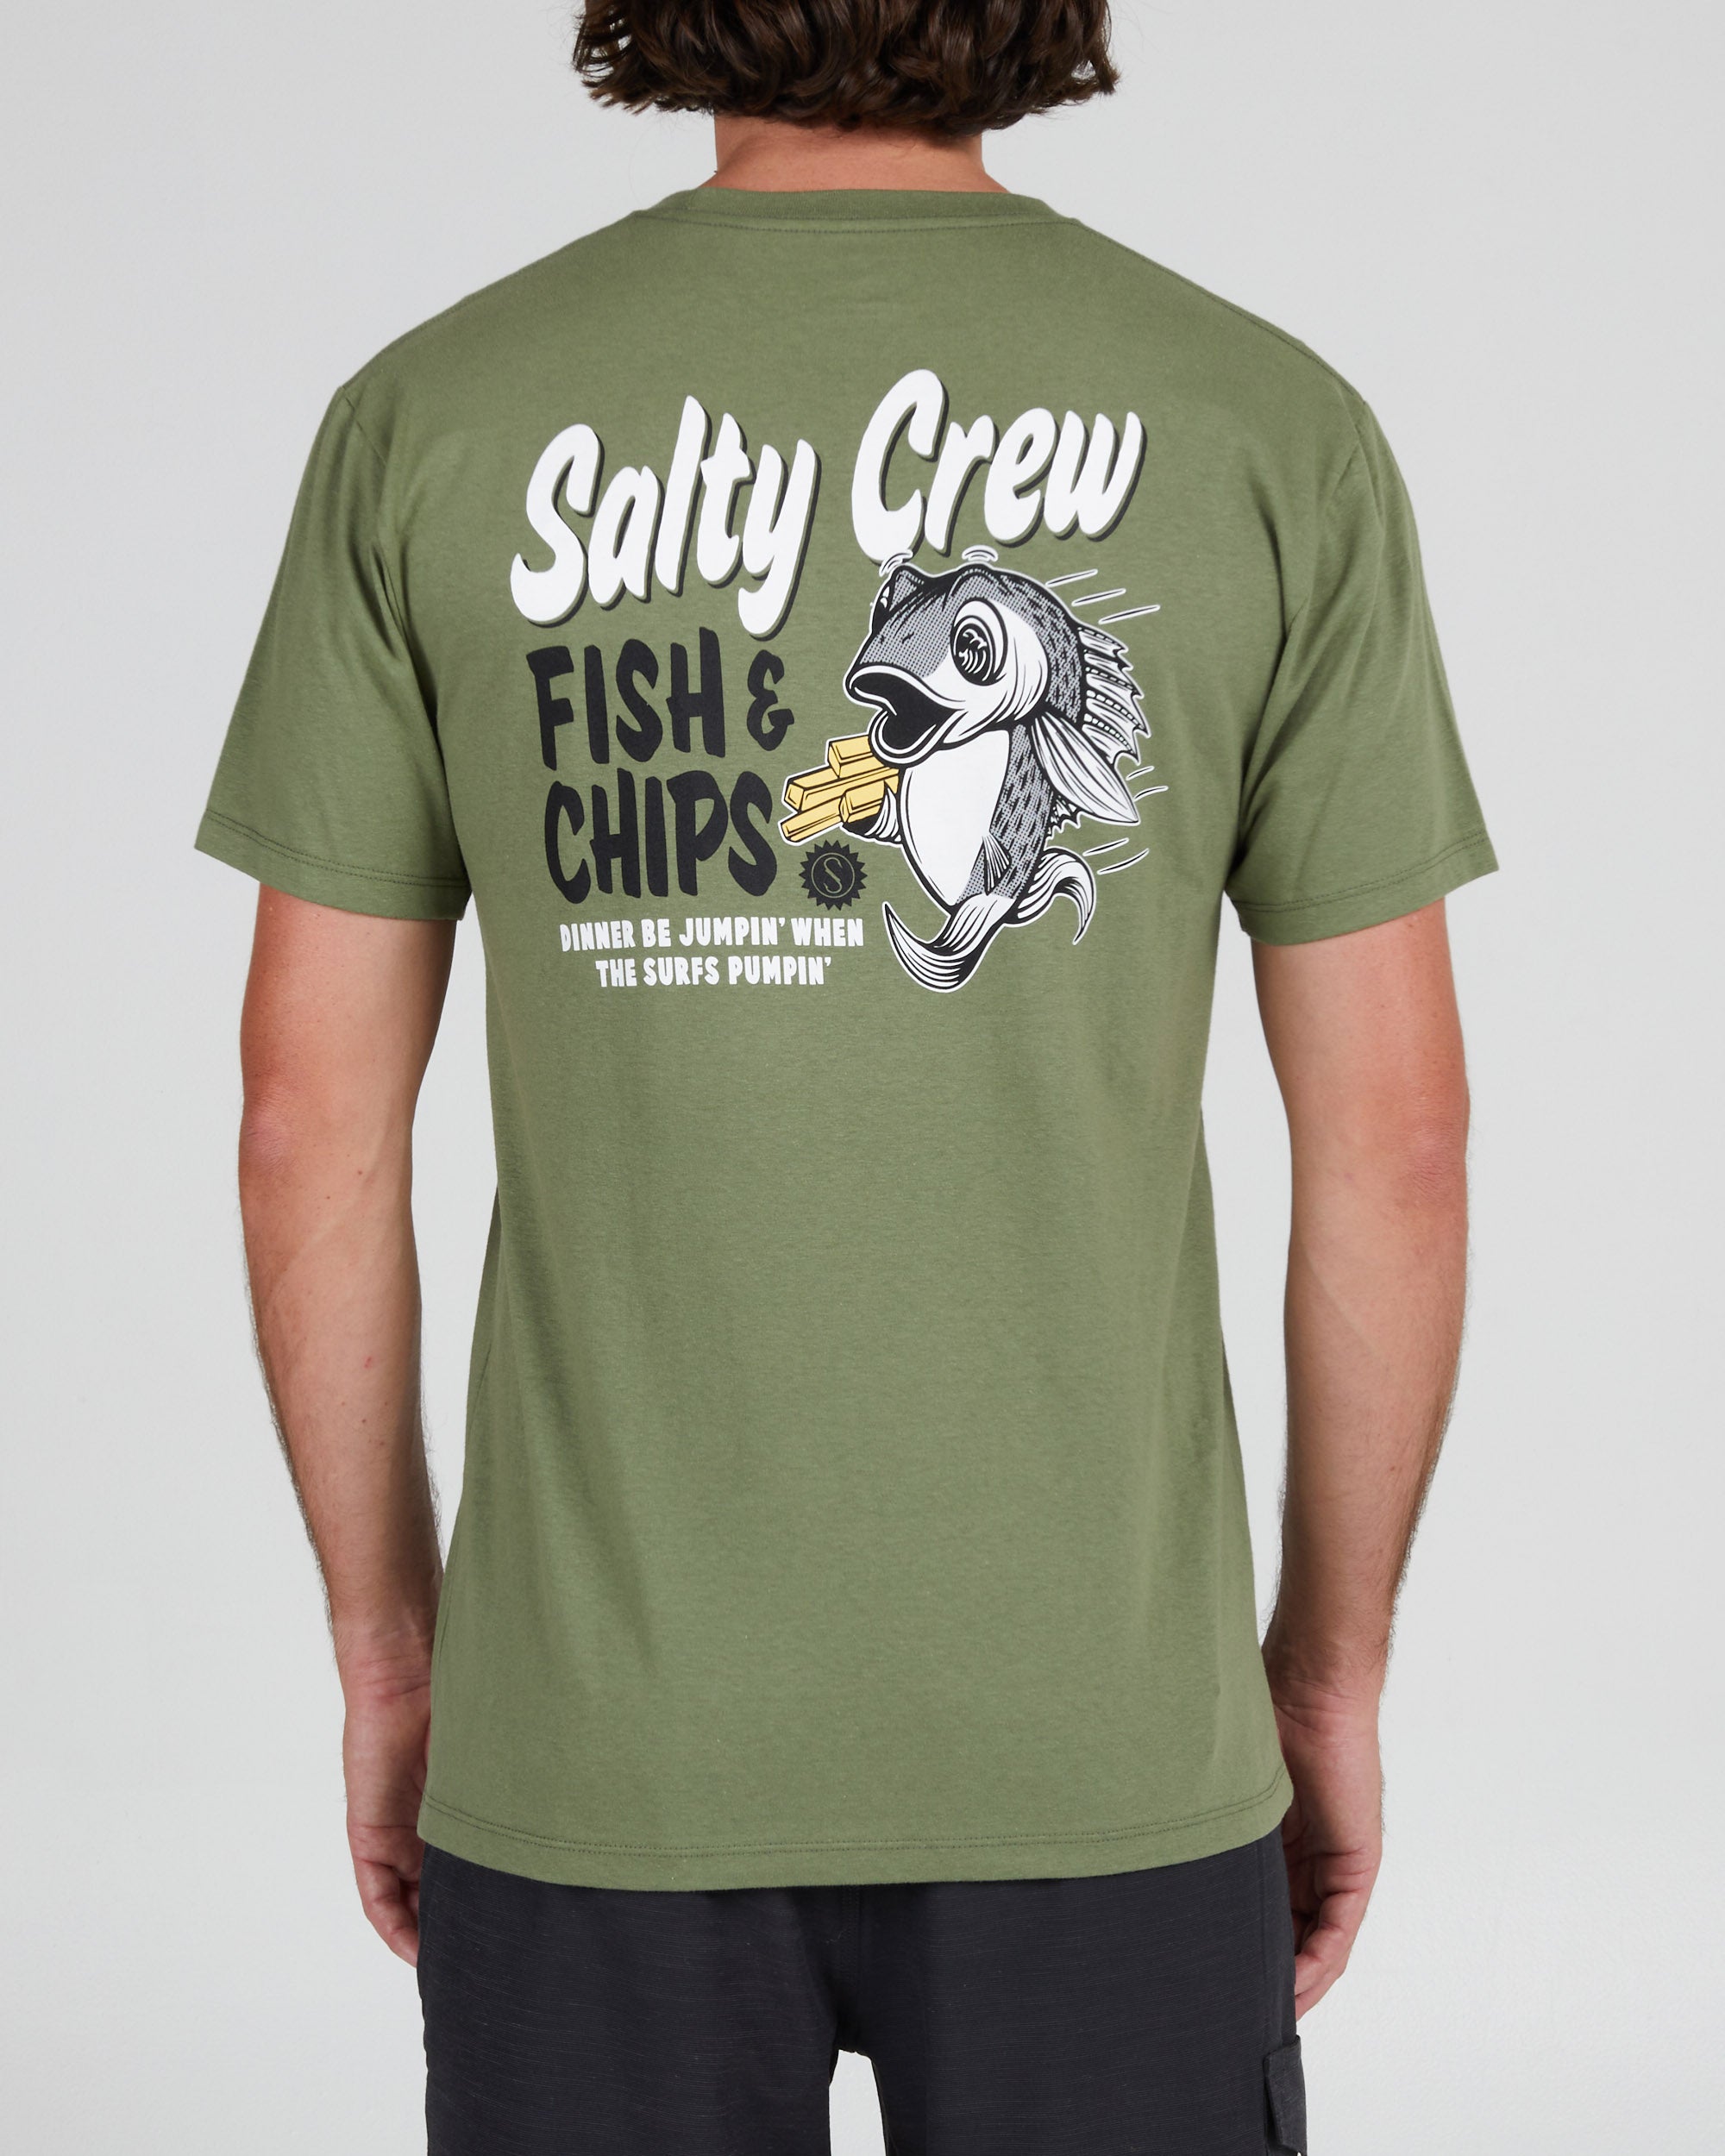 Salty Crew - Fish and Chips Premium Short Sleeve Tee